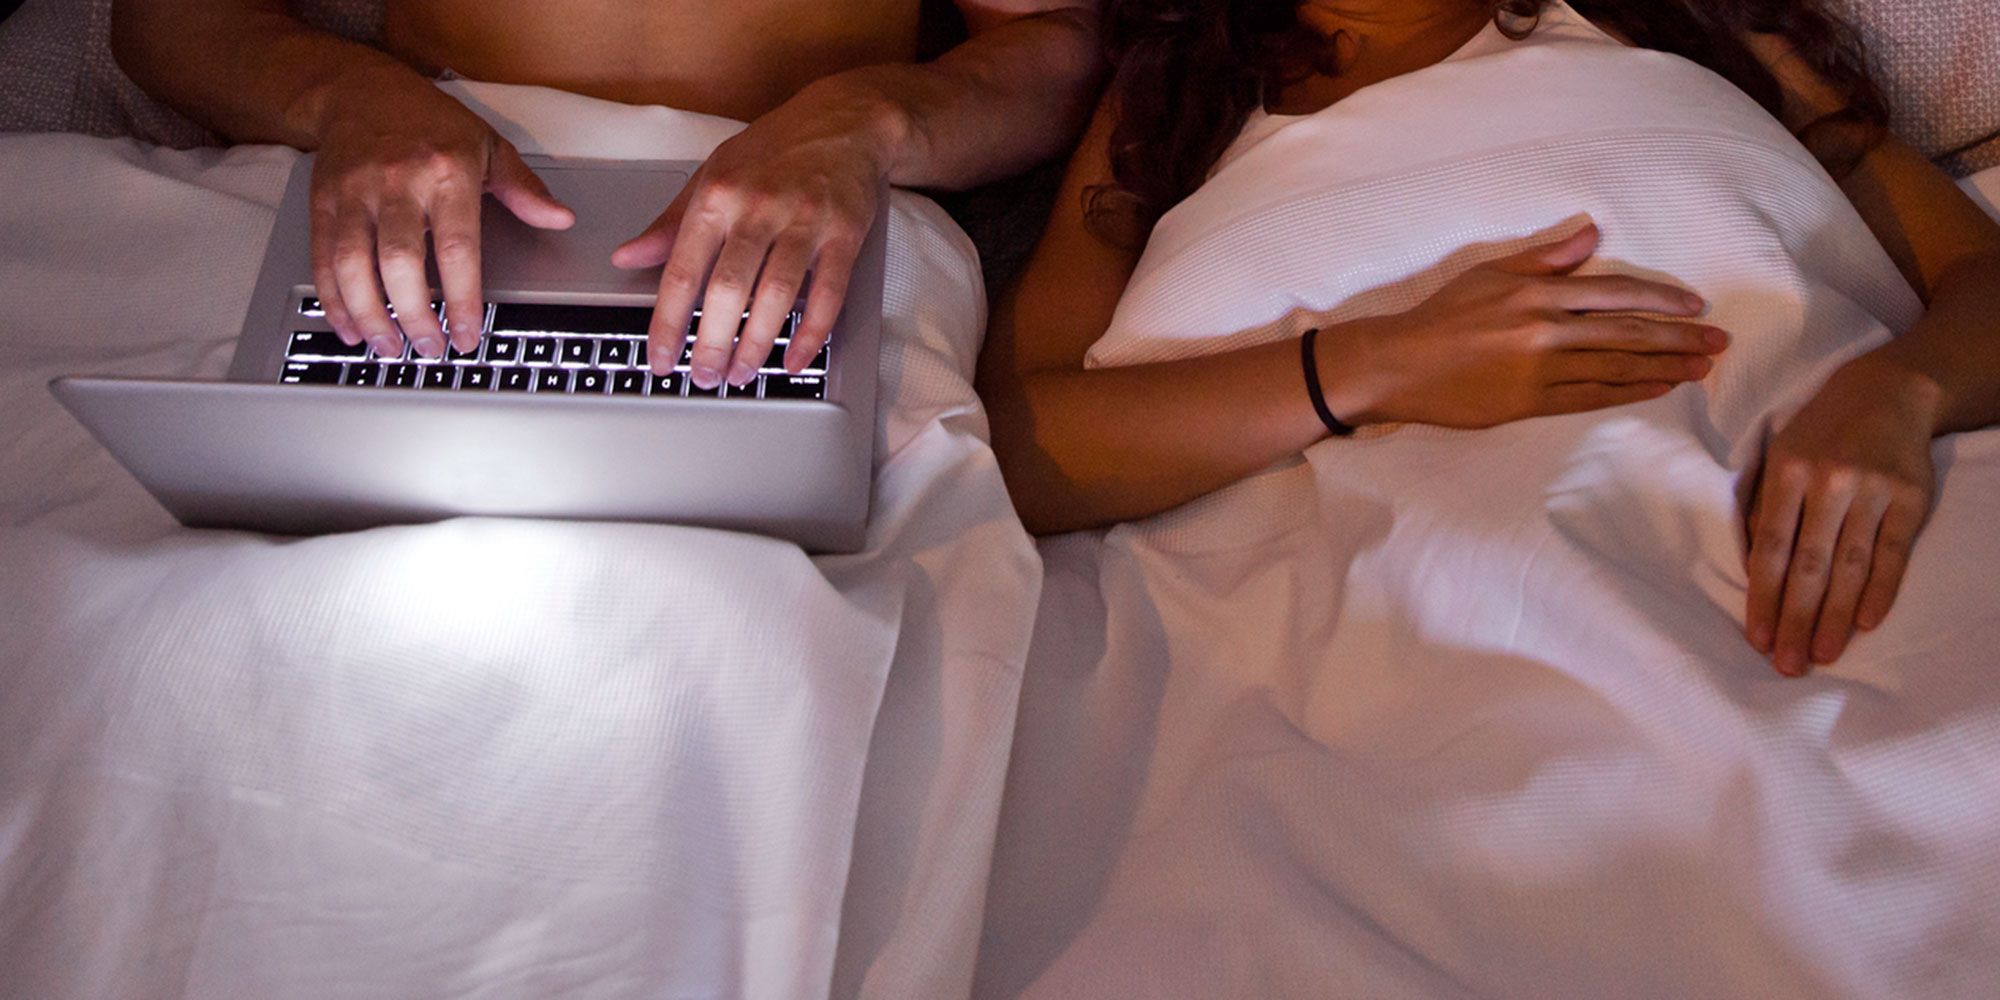 Watching porn together Why couples watch porn